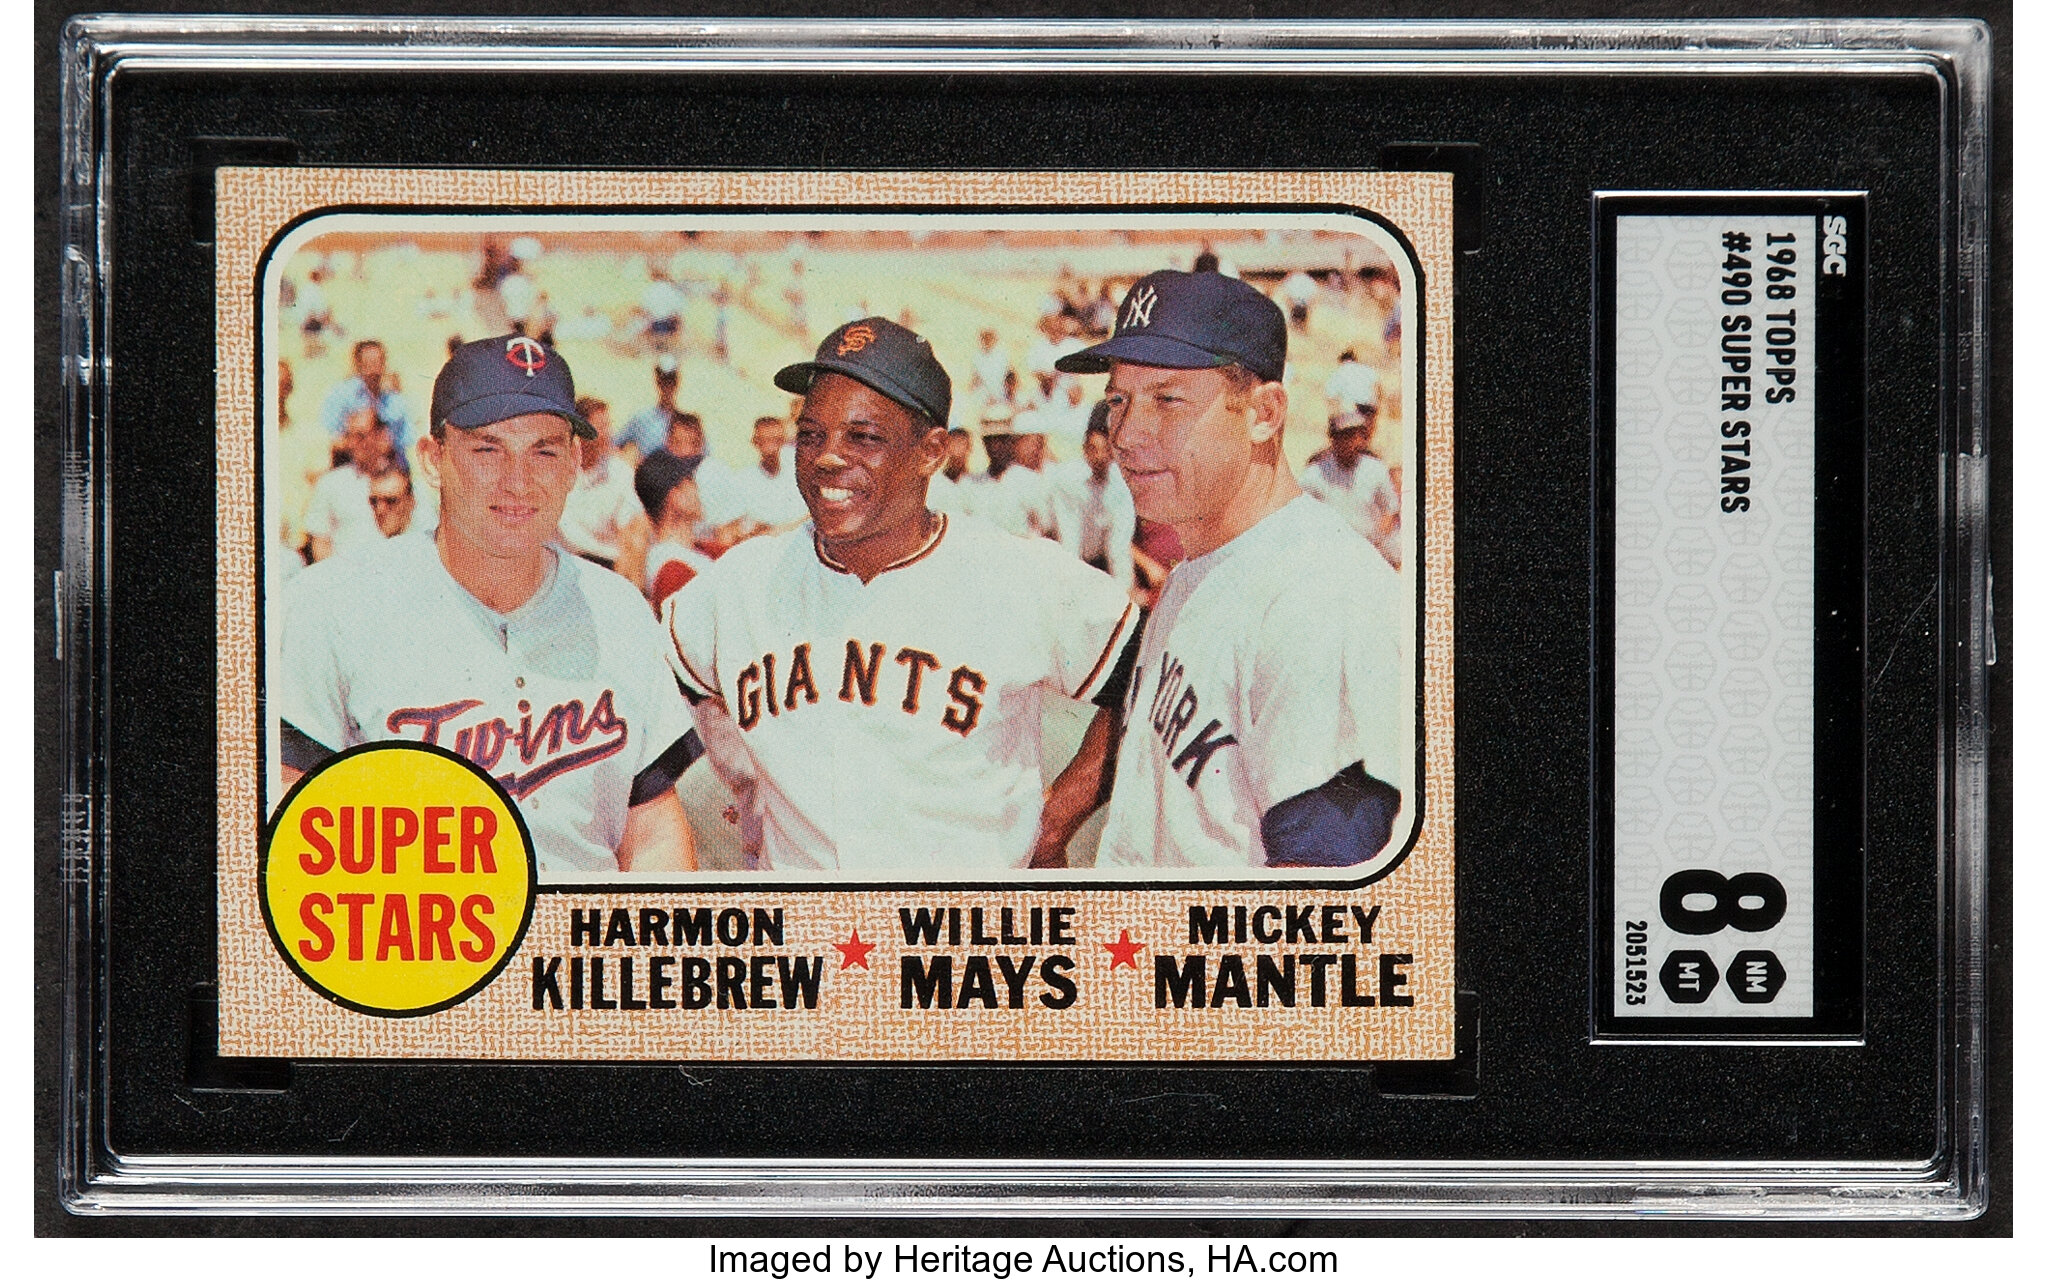 1968 Topps Mickey Mantle/Willie Mays/Harmon Killebrew Card #490